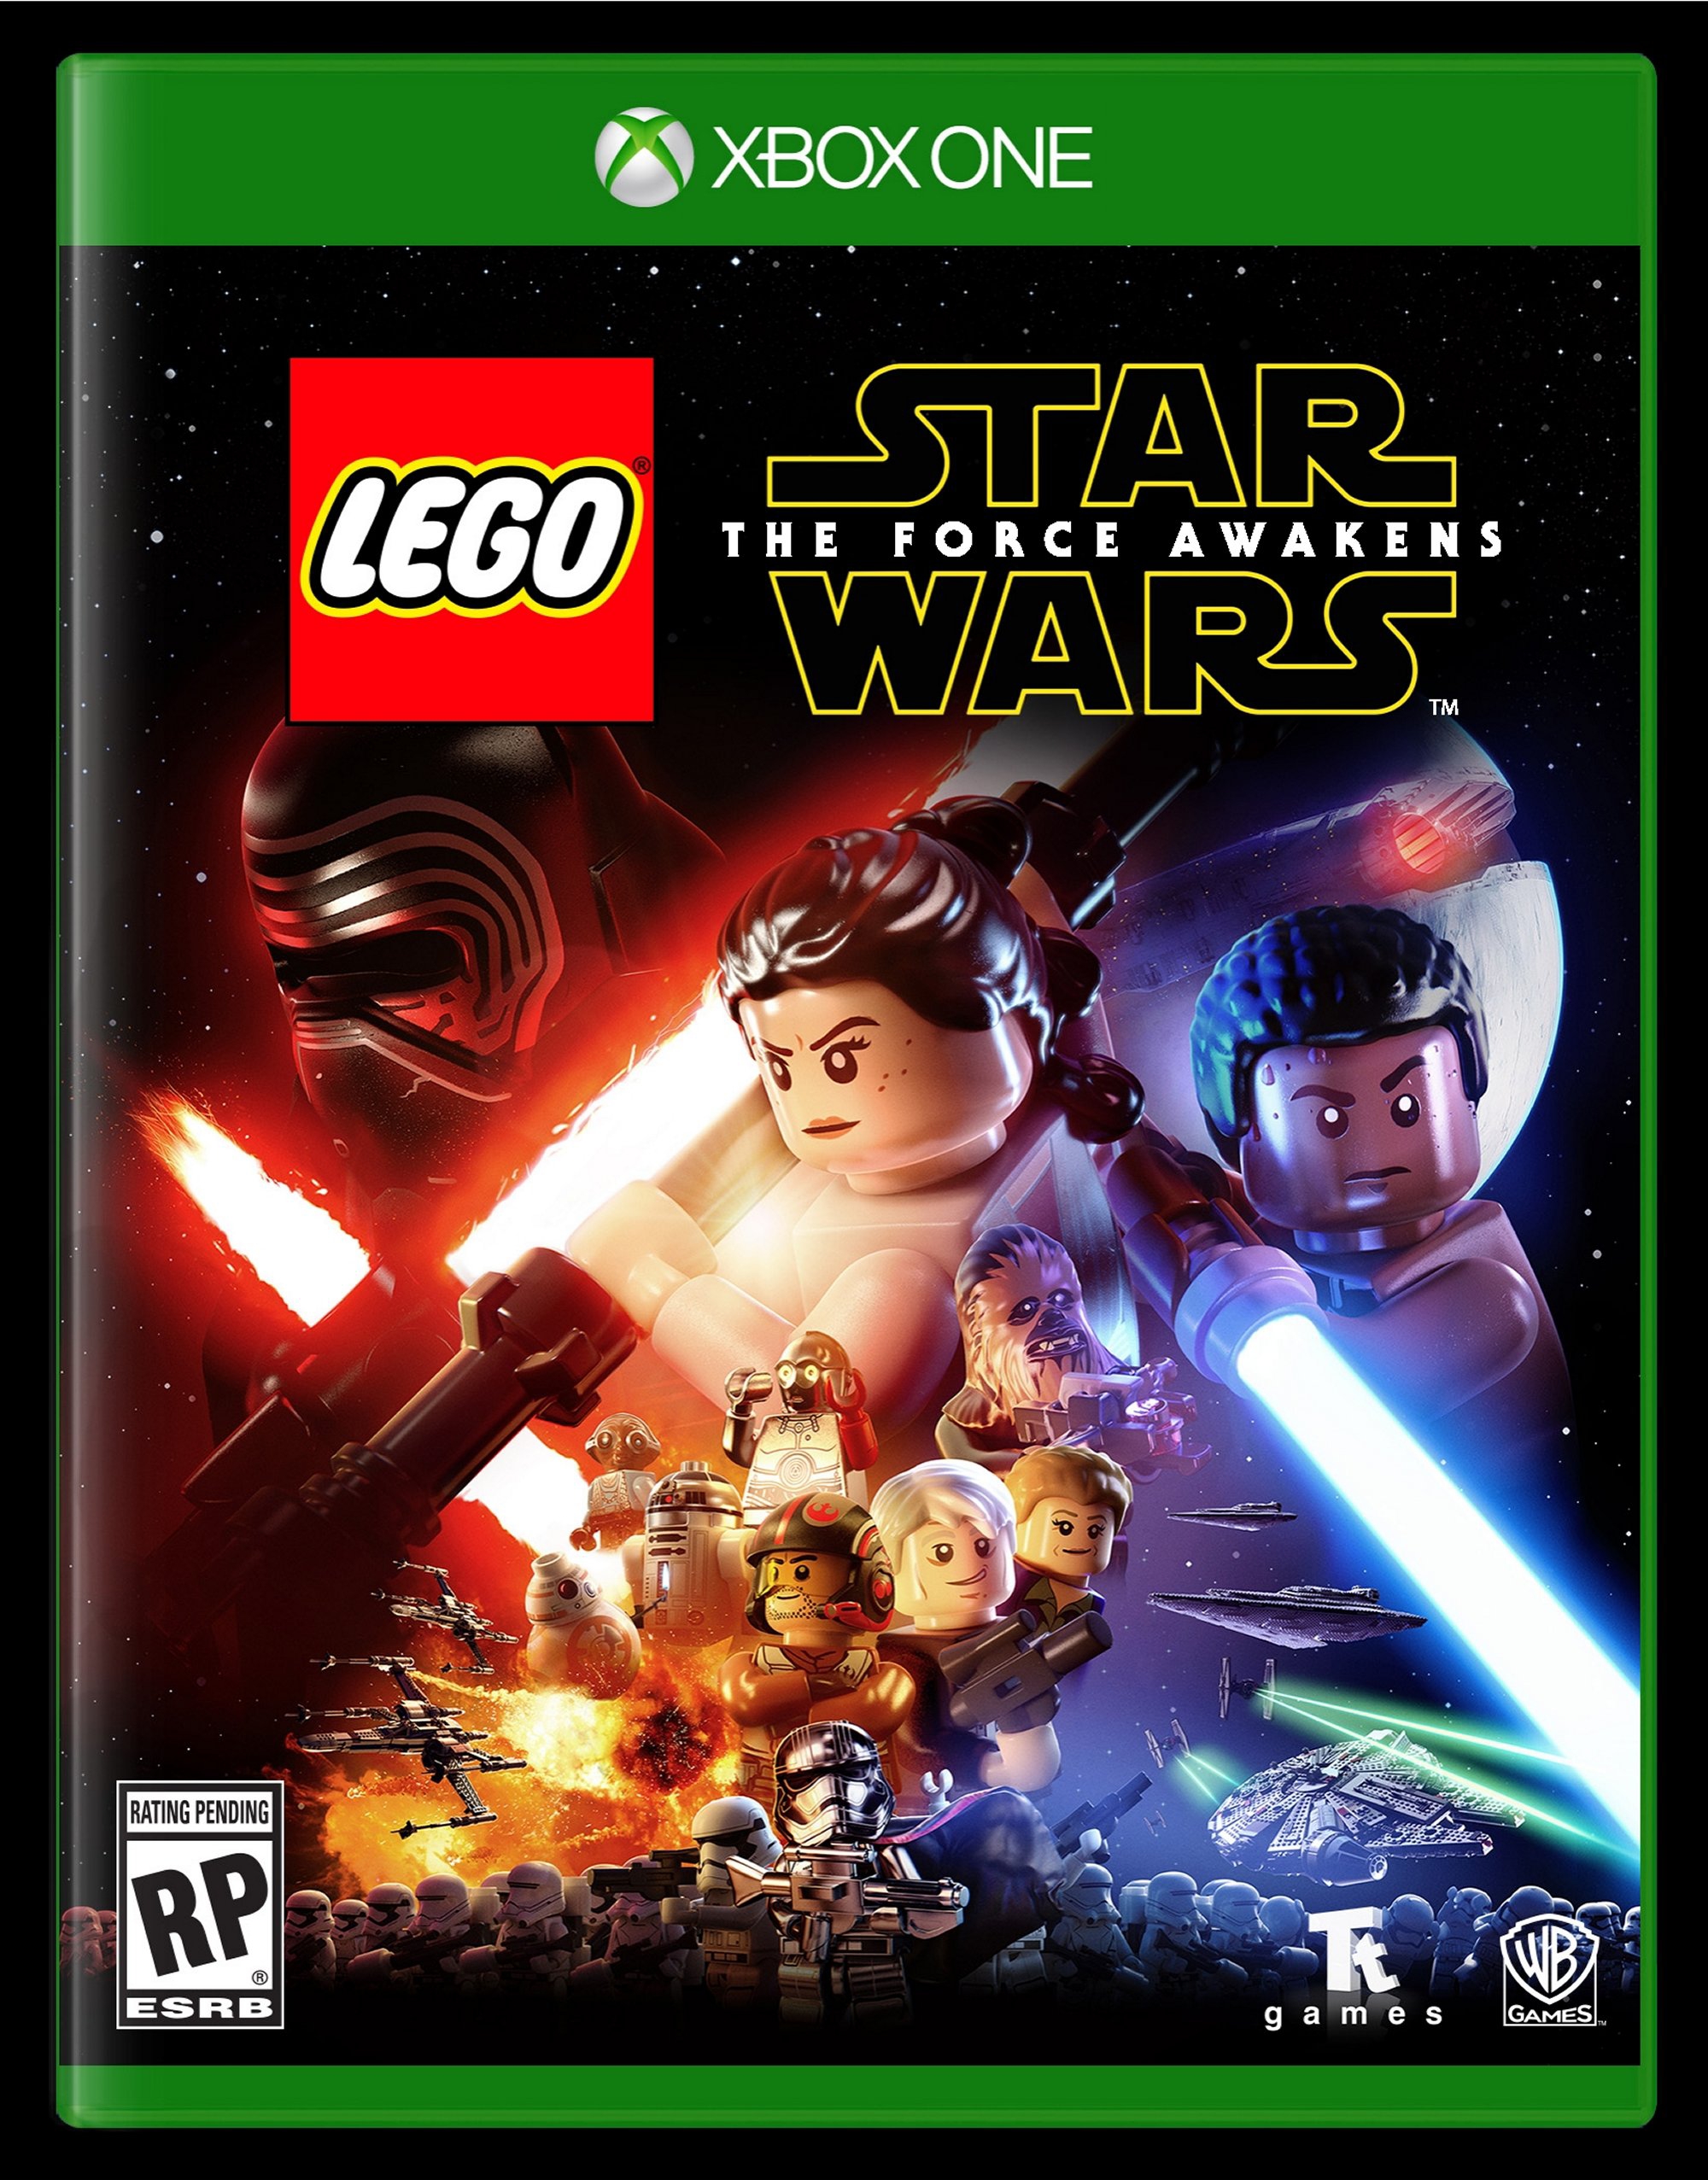 star wars game for xbox one